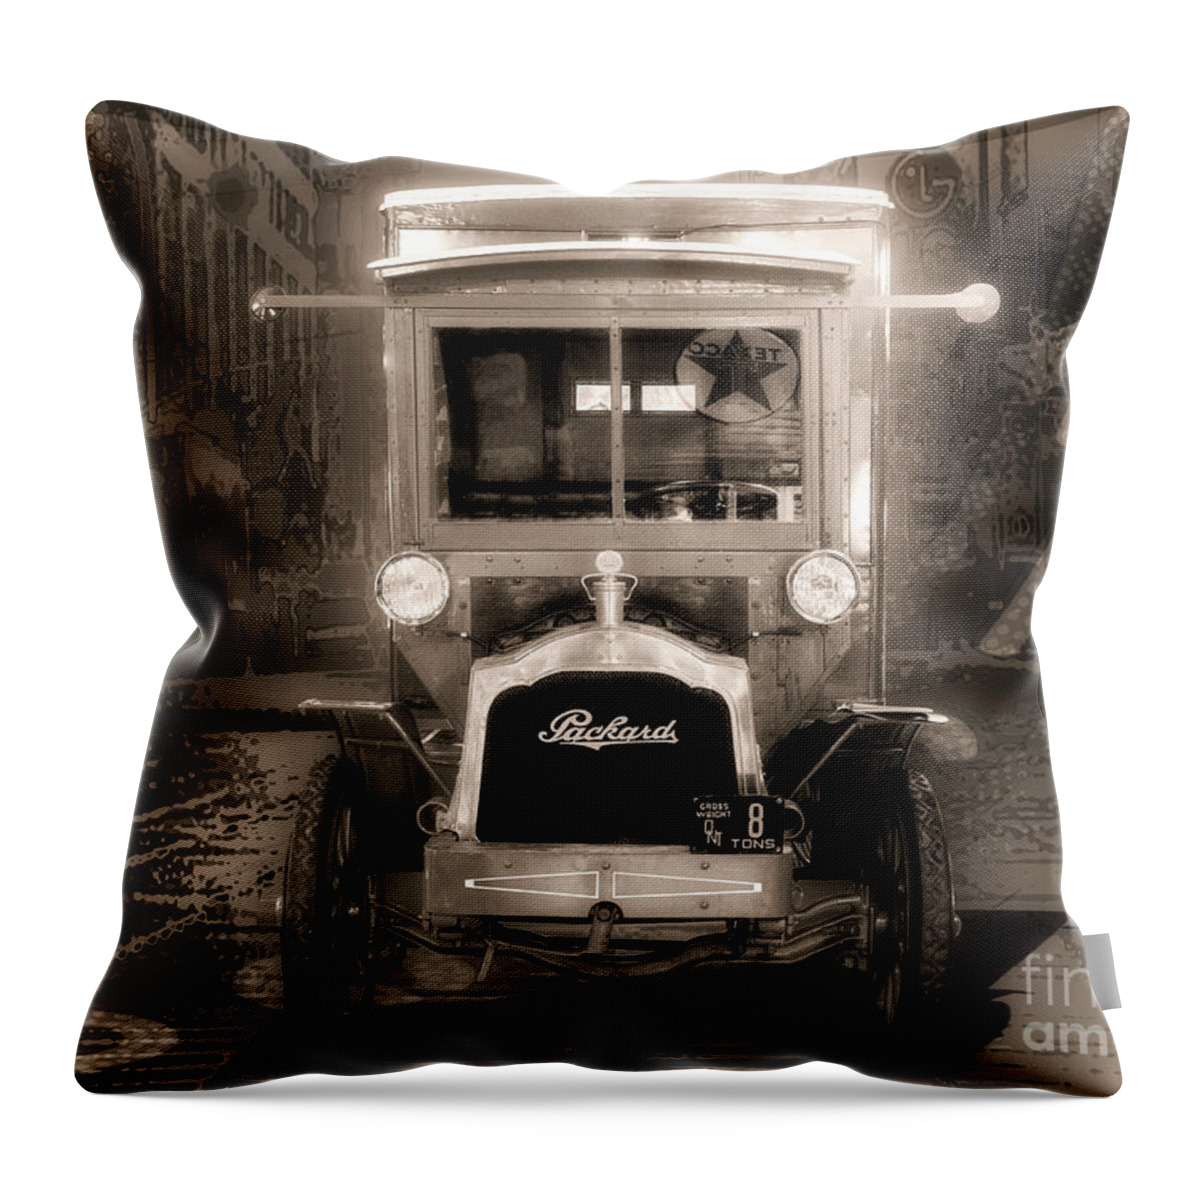 Vintage Packard Throw Pillow featuring the digital art 1915 Packard Model E 2.5 Ton - Monochormatic by Anthony Ellis